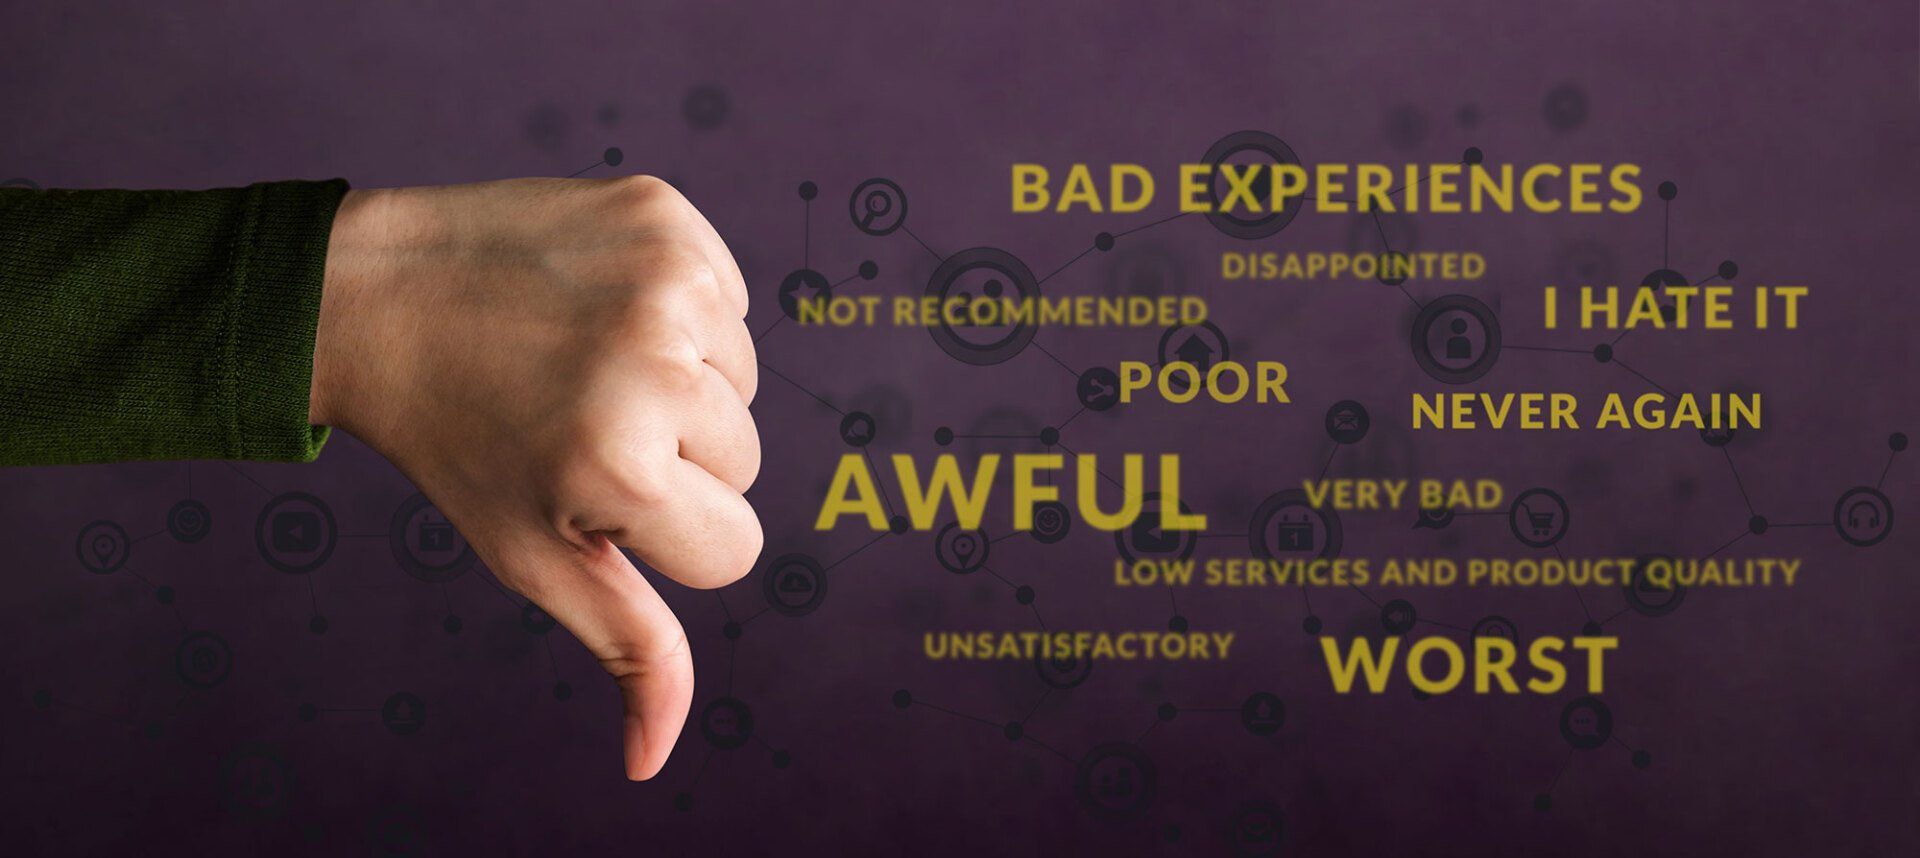 thumbs down - words that describe bad experiences